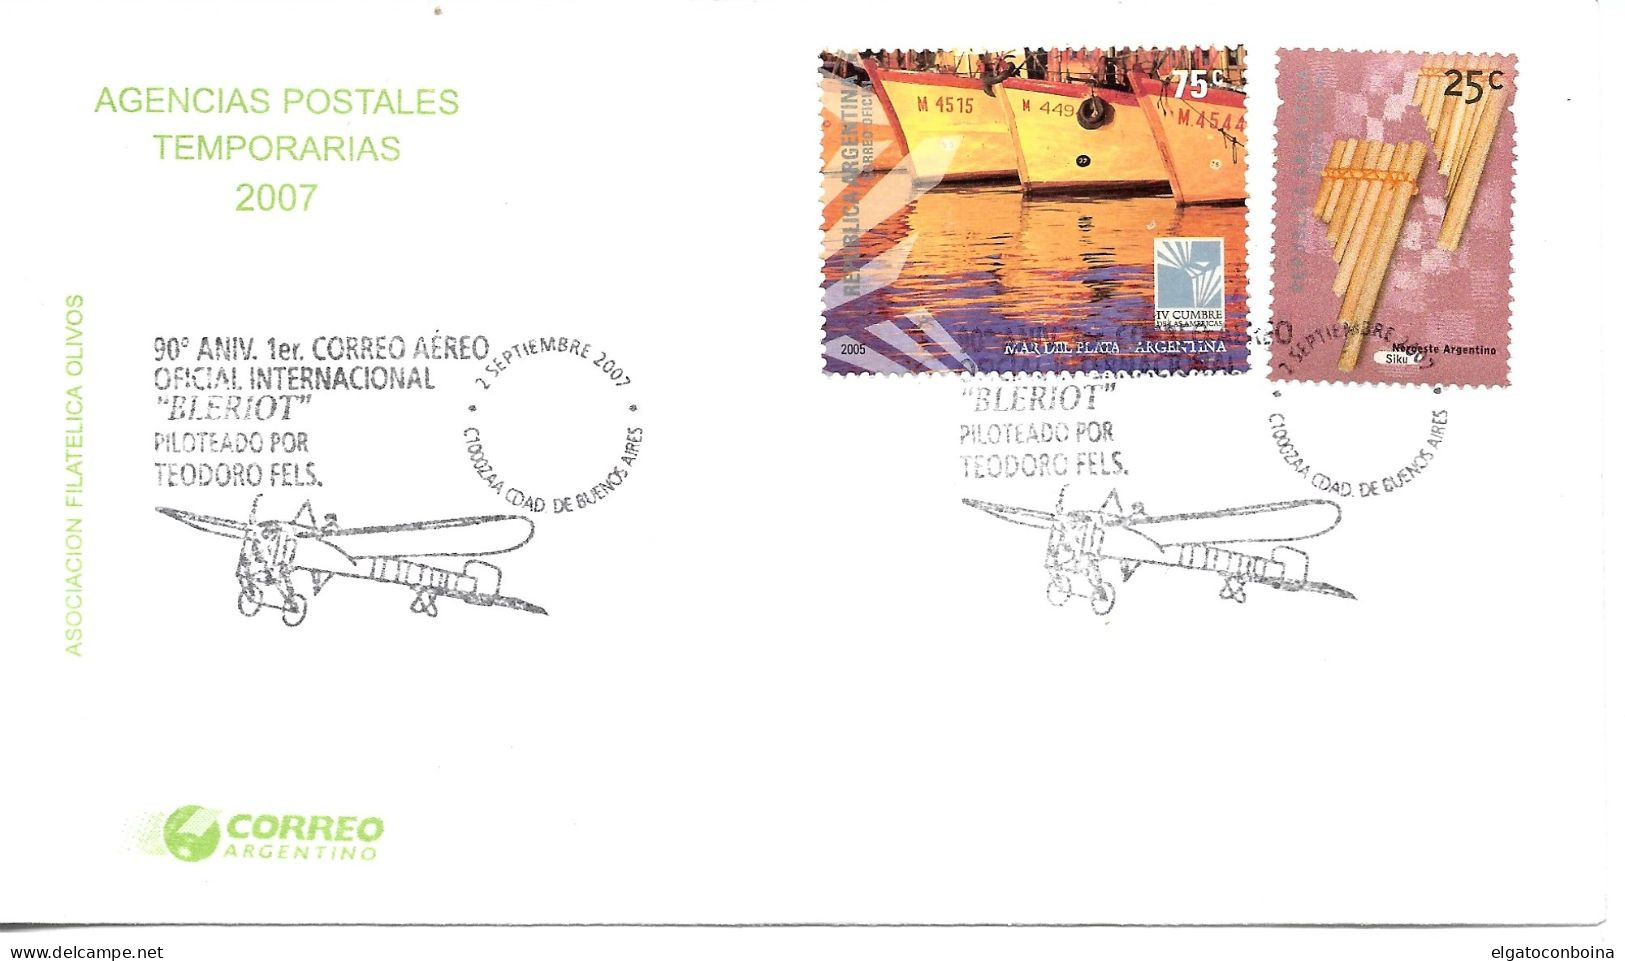 ARGENTINA 2007 FIRST INTERNATIONAL AIR MAIL POSTAL SERVICE BLERIOT 90TH ANNIV COVER WITH SPECIAL POSTMARK - Used Stamps